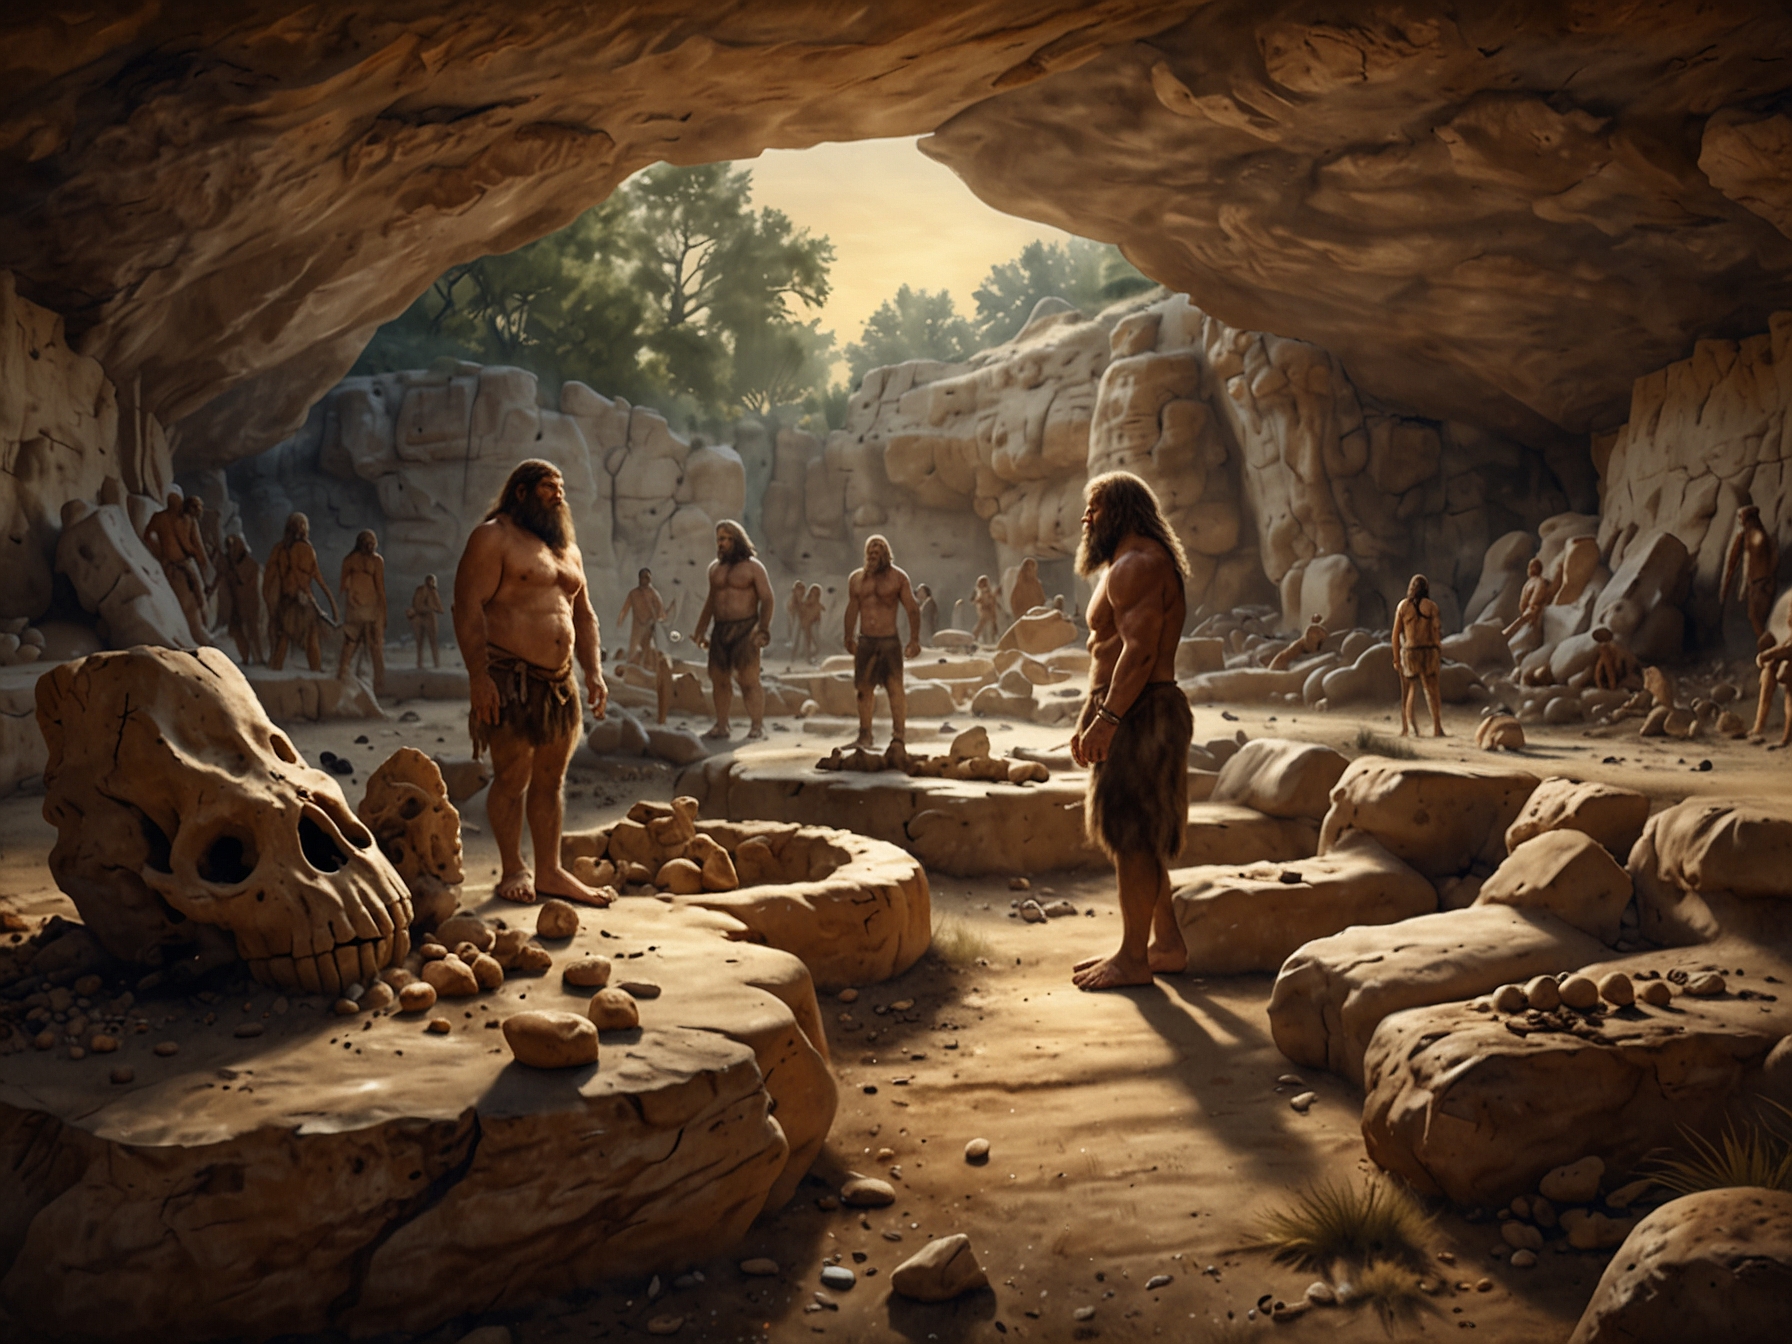 An archaeological site showing artifacts from both Neanderthals and modern humans, symbolizing their cultural exchanges and interbreeding around 47,000 years ago.